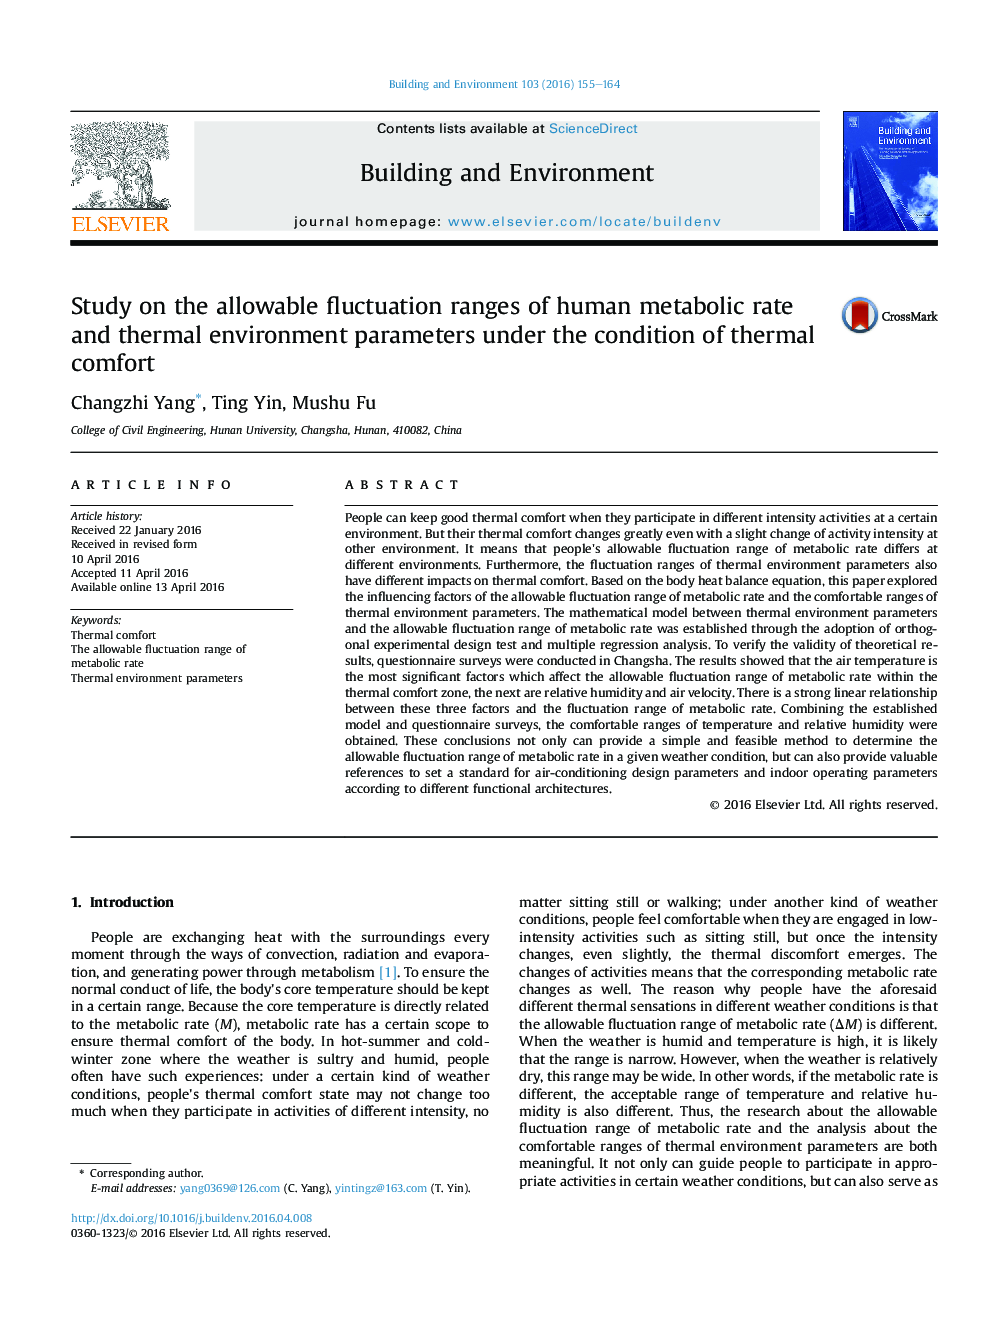 Study on the allowable fluctuation ranges of human metabolic rate and thermal environment parameters under the condition of thermal comfort